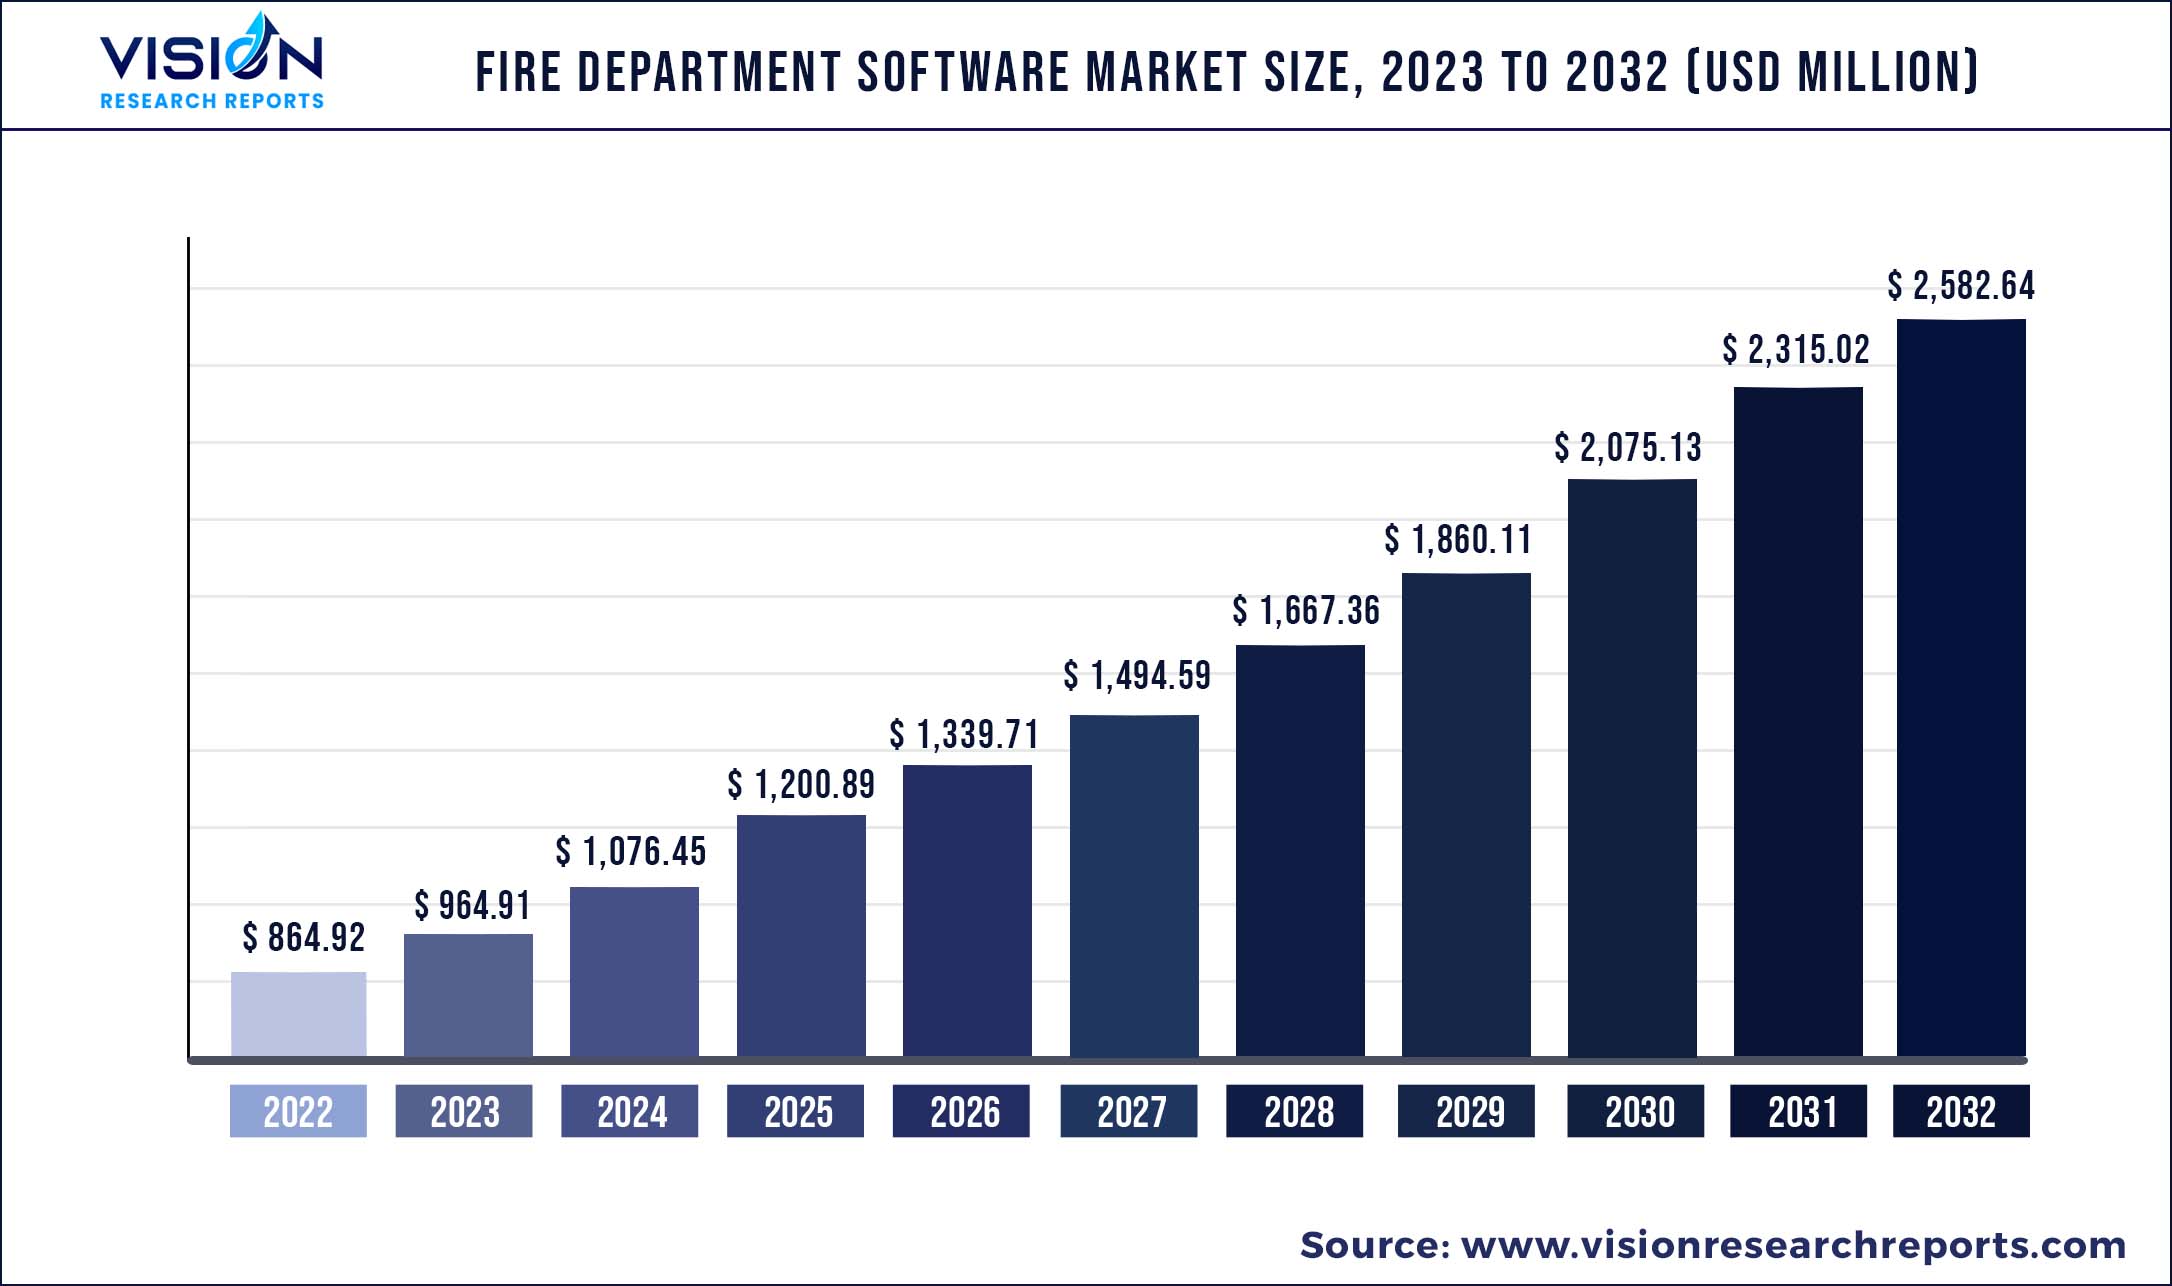 Fire Department Software Market Size 2023 to 2032